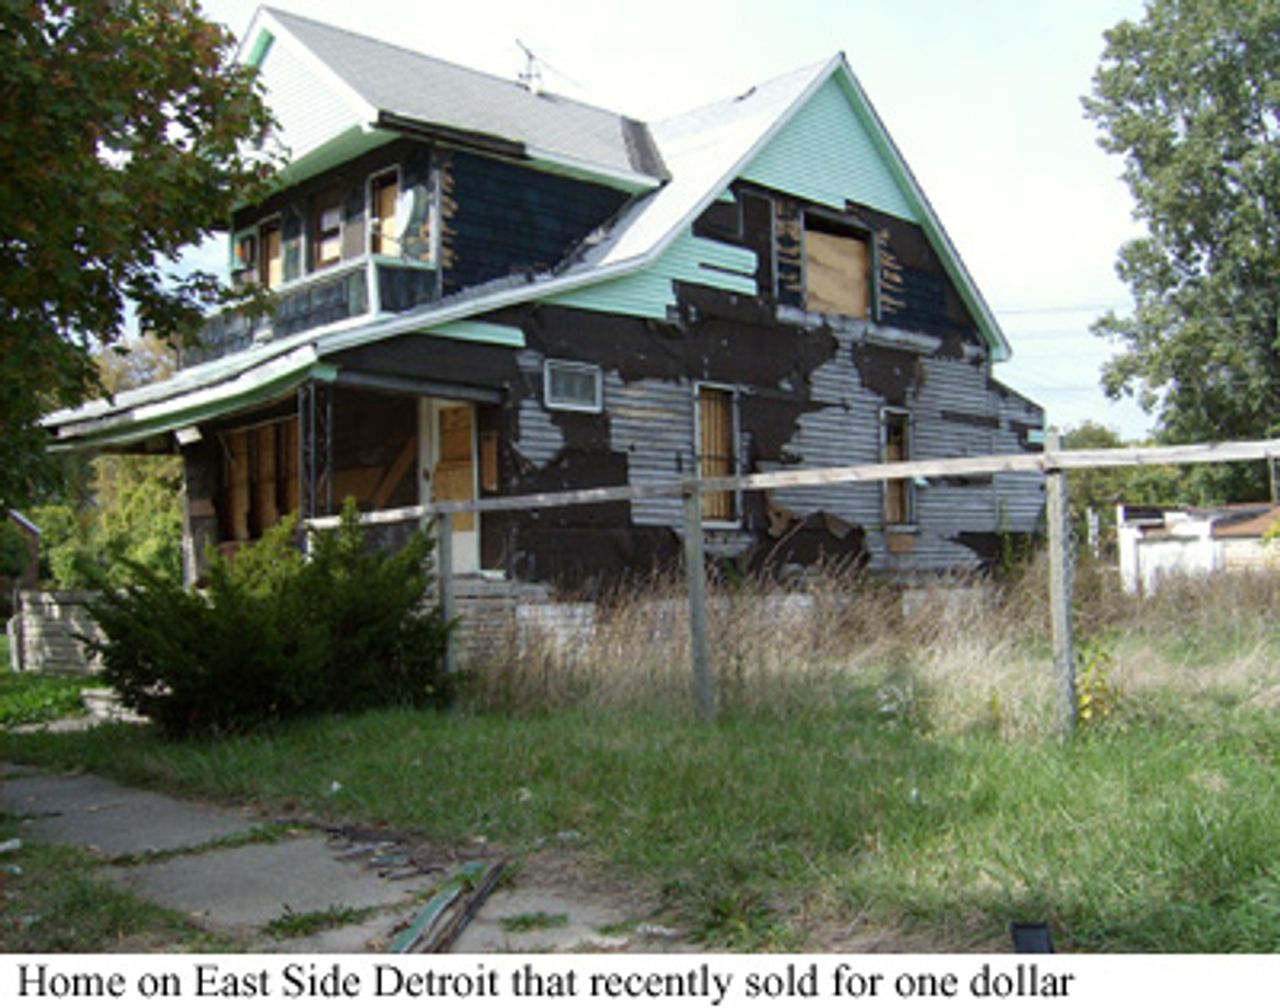 Home on East Side Detroit that recently sold for one dollar